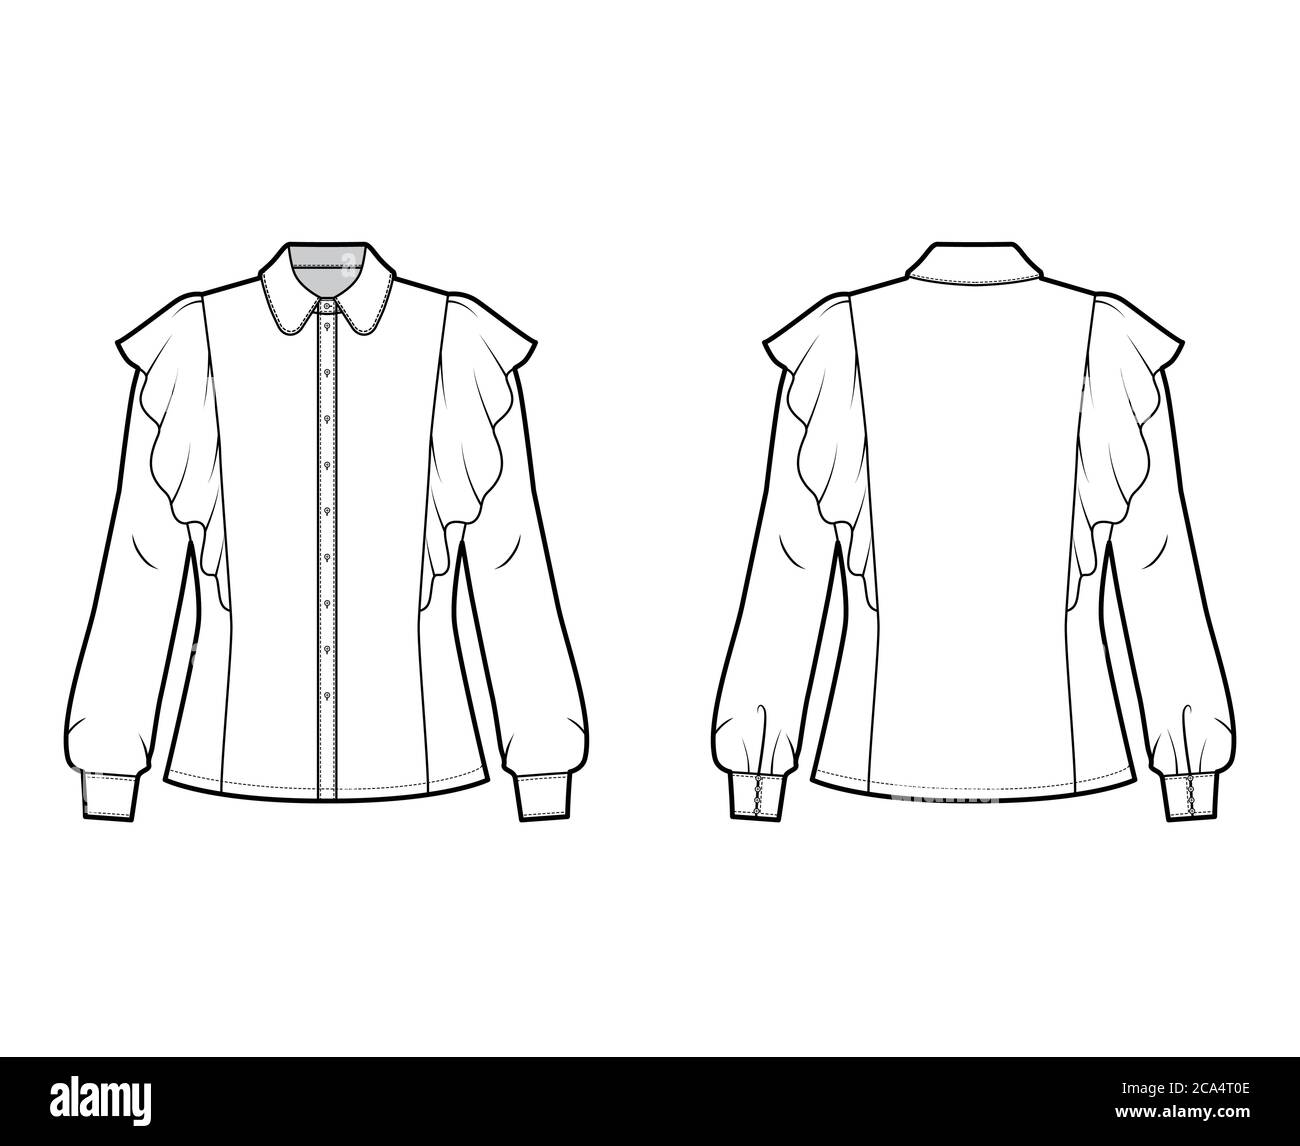 Shirt technical fashion illustration with fitted body, round collar ...